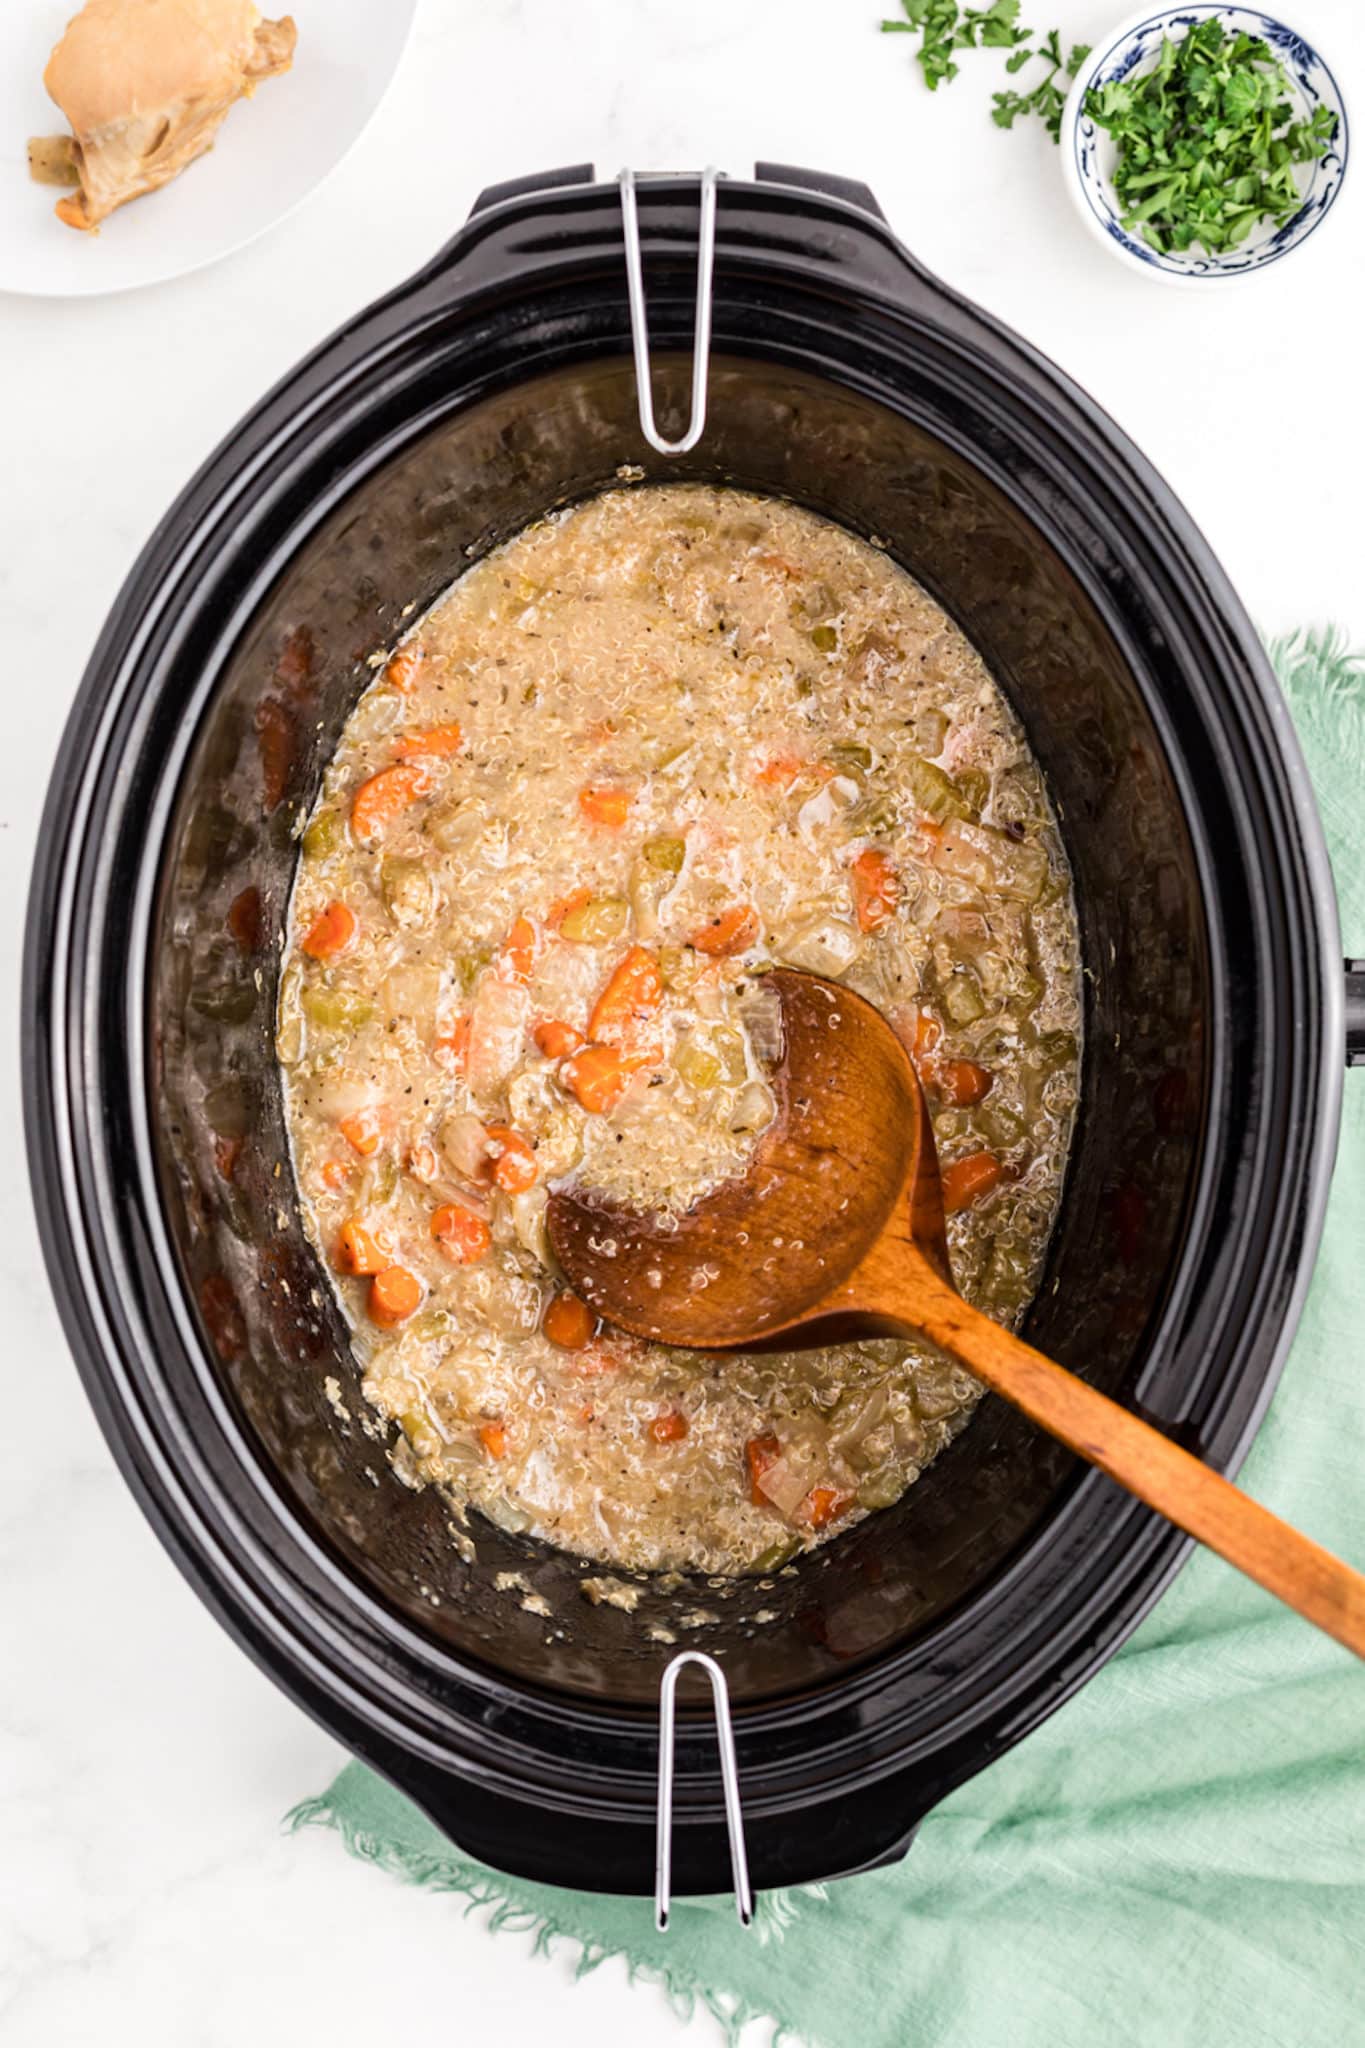 cooked quinoa and chicken stew inside a crockpot.